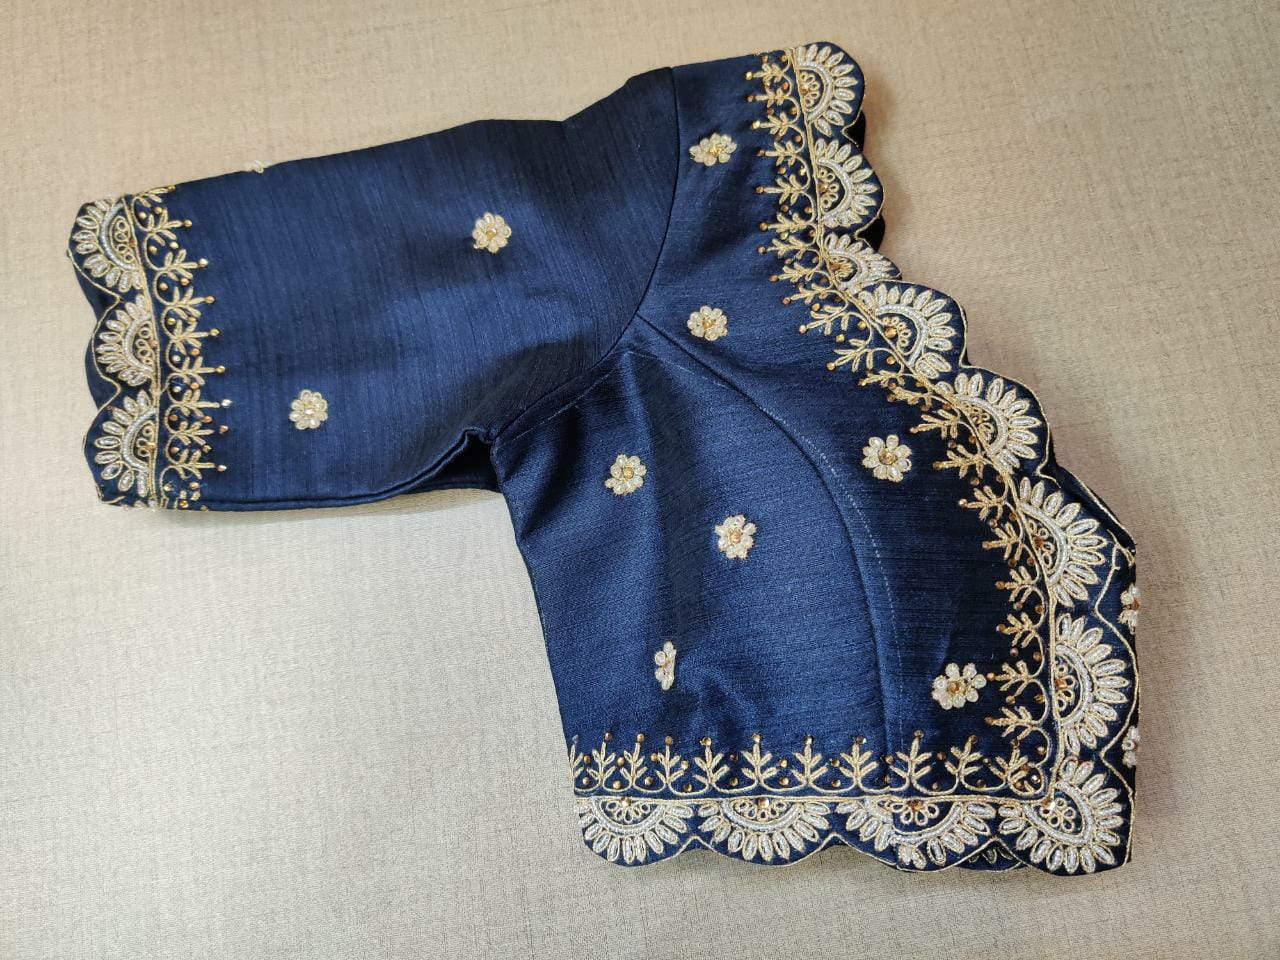 Buy beautiful dark blue embroidered saree blouse online in USA. Elevate your Indian ethnic saree looks with beautiful readymade saree blouse, embroidered saree blouses, Banarasi saree blouse, designer sari blouses, sleeveless saree blouses from Pure Elegance Indian fashion store in USA.-sleeves